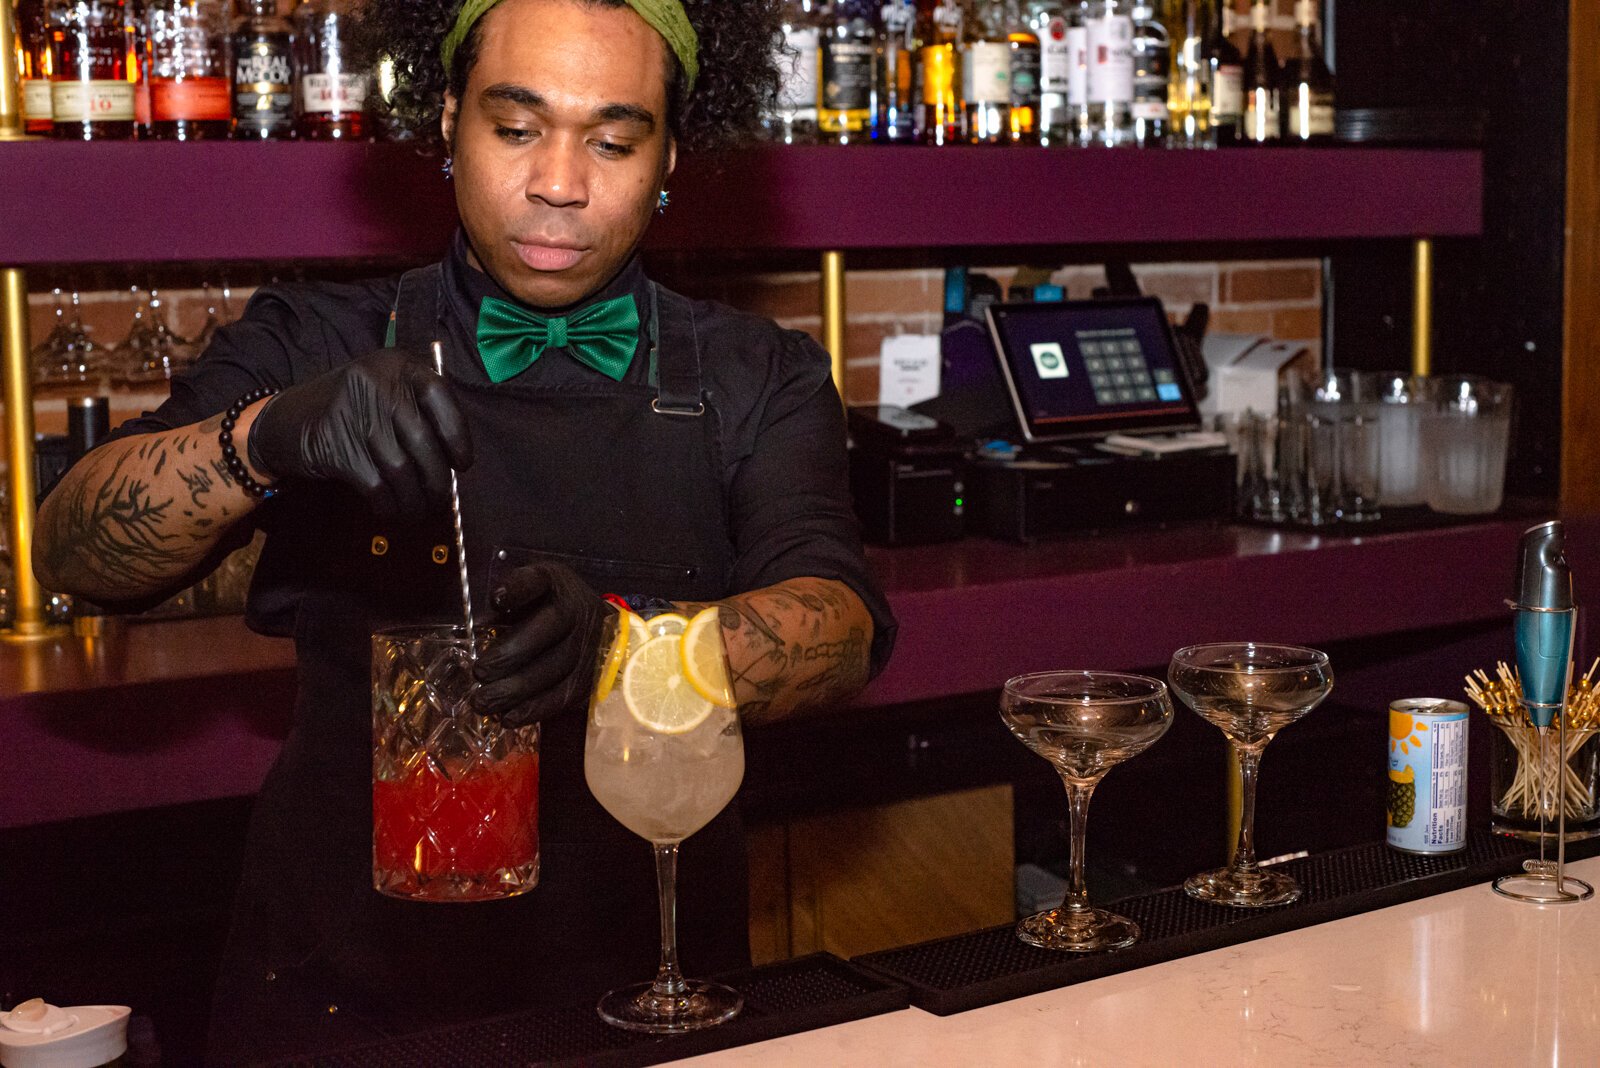 Bartender Killian Ongonian makes a mean Mint Julep, among other signature drinks.